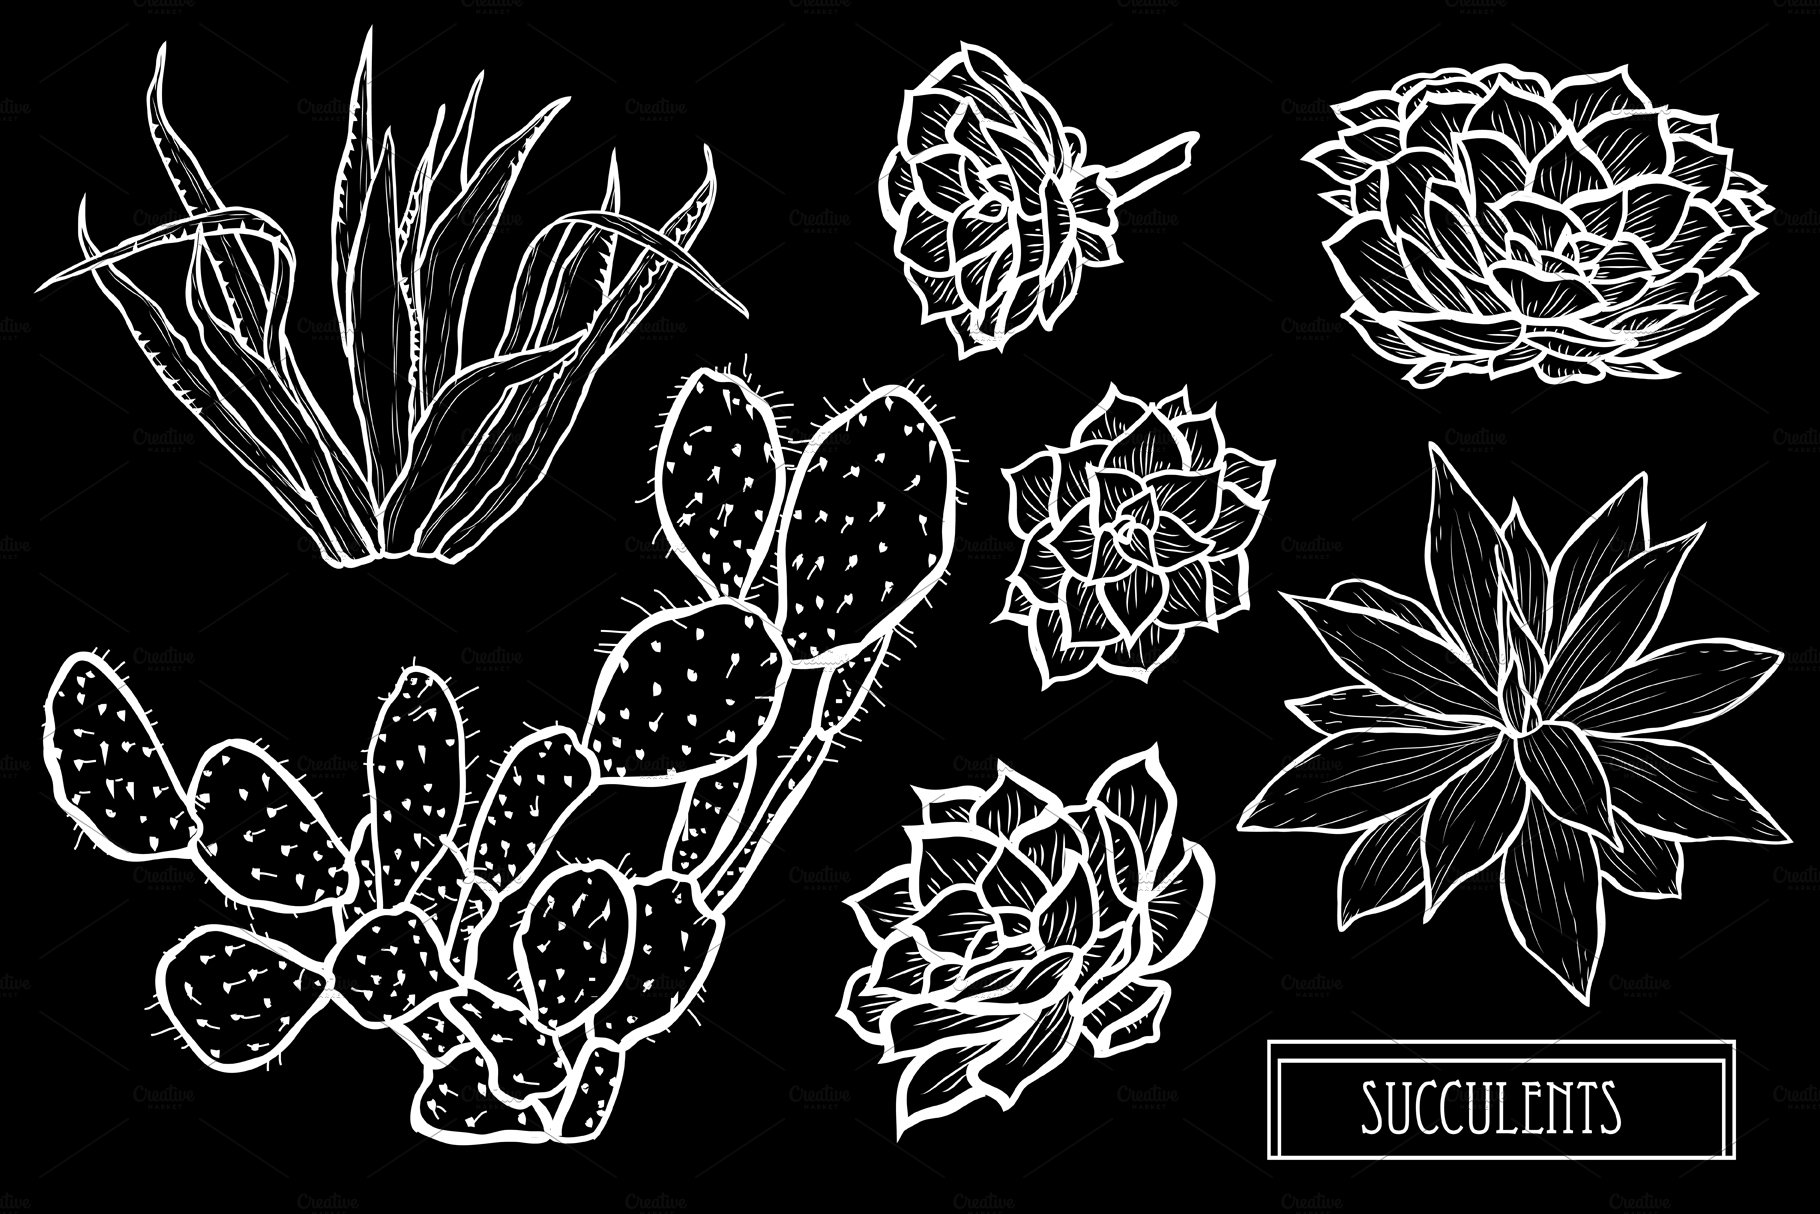 Bunch of cactus plants on a black background.